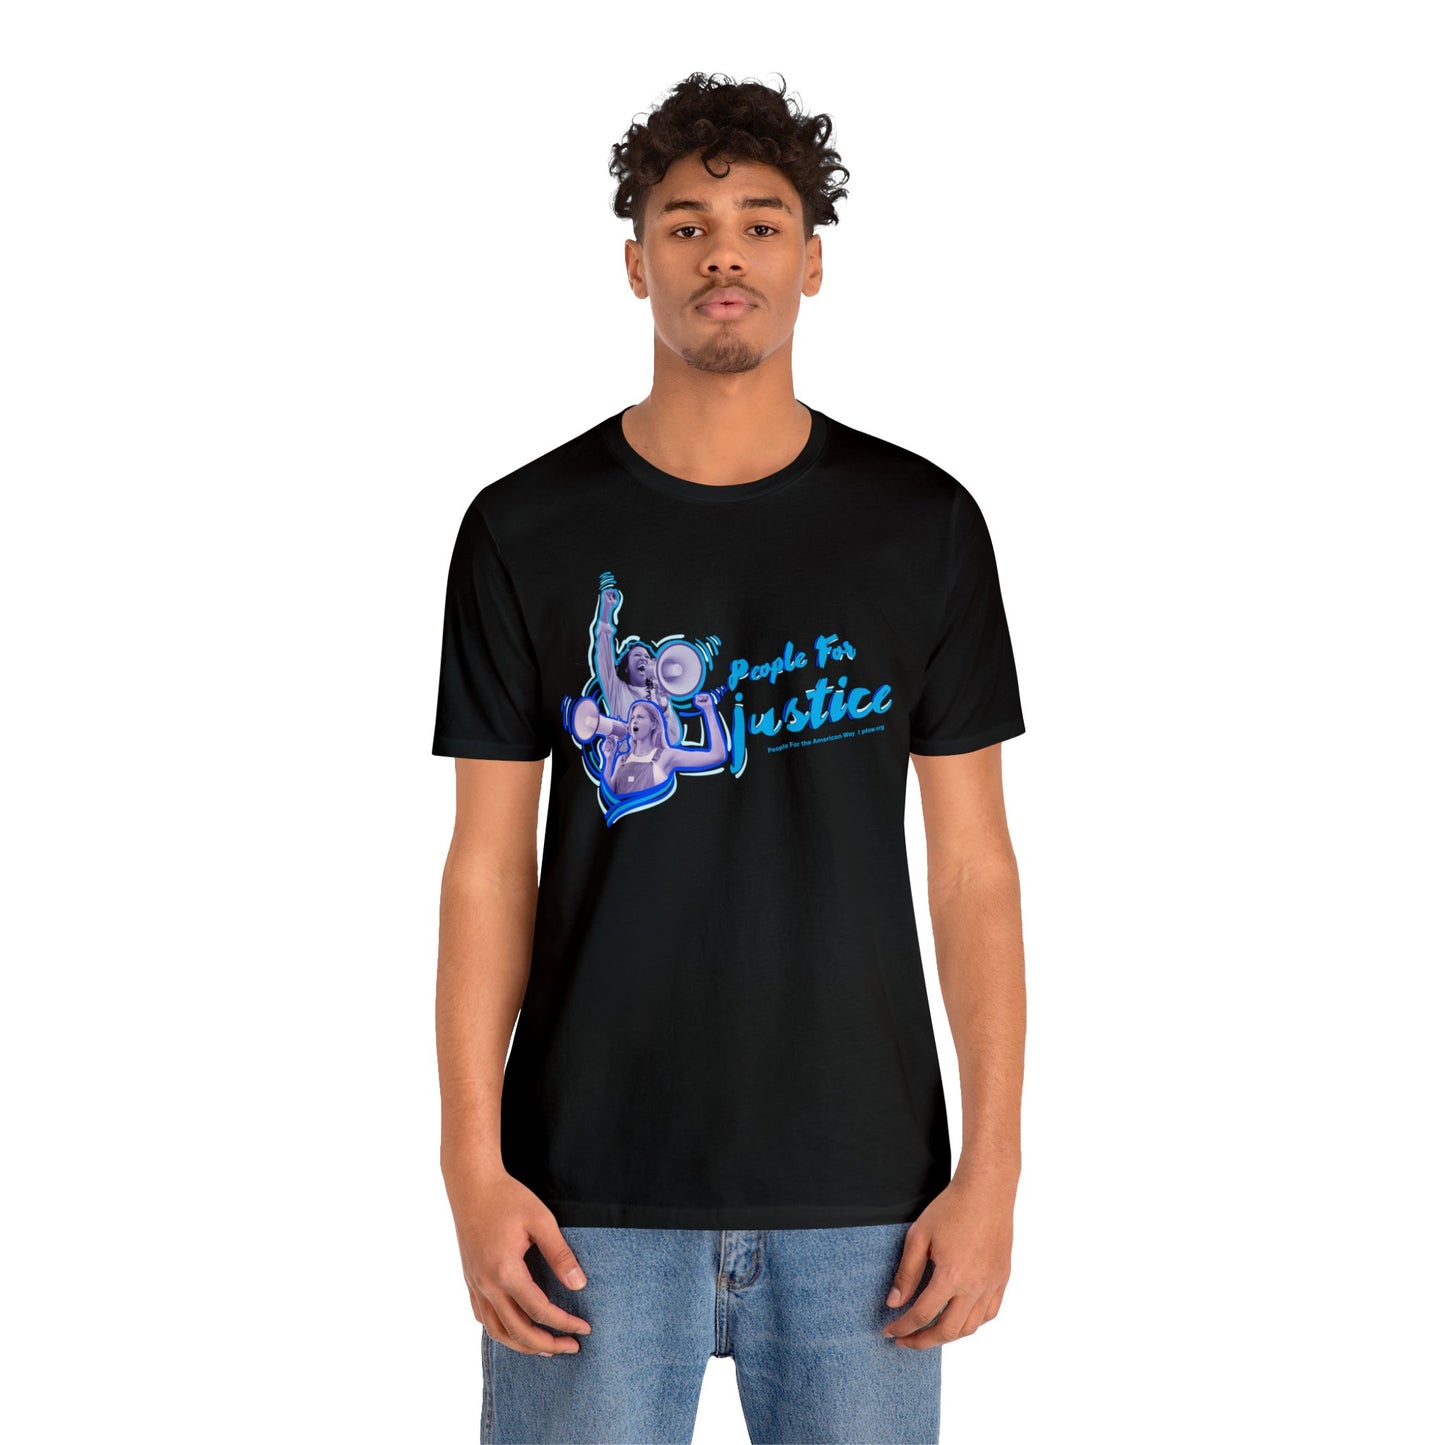 People For Justice Shirt